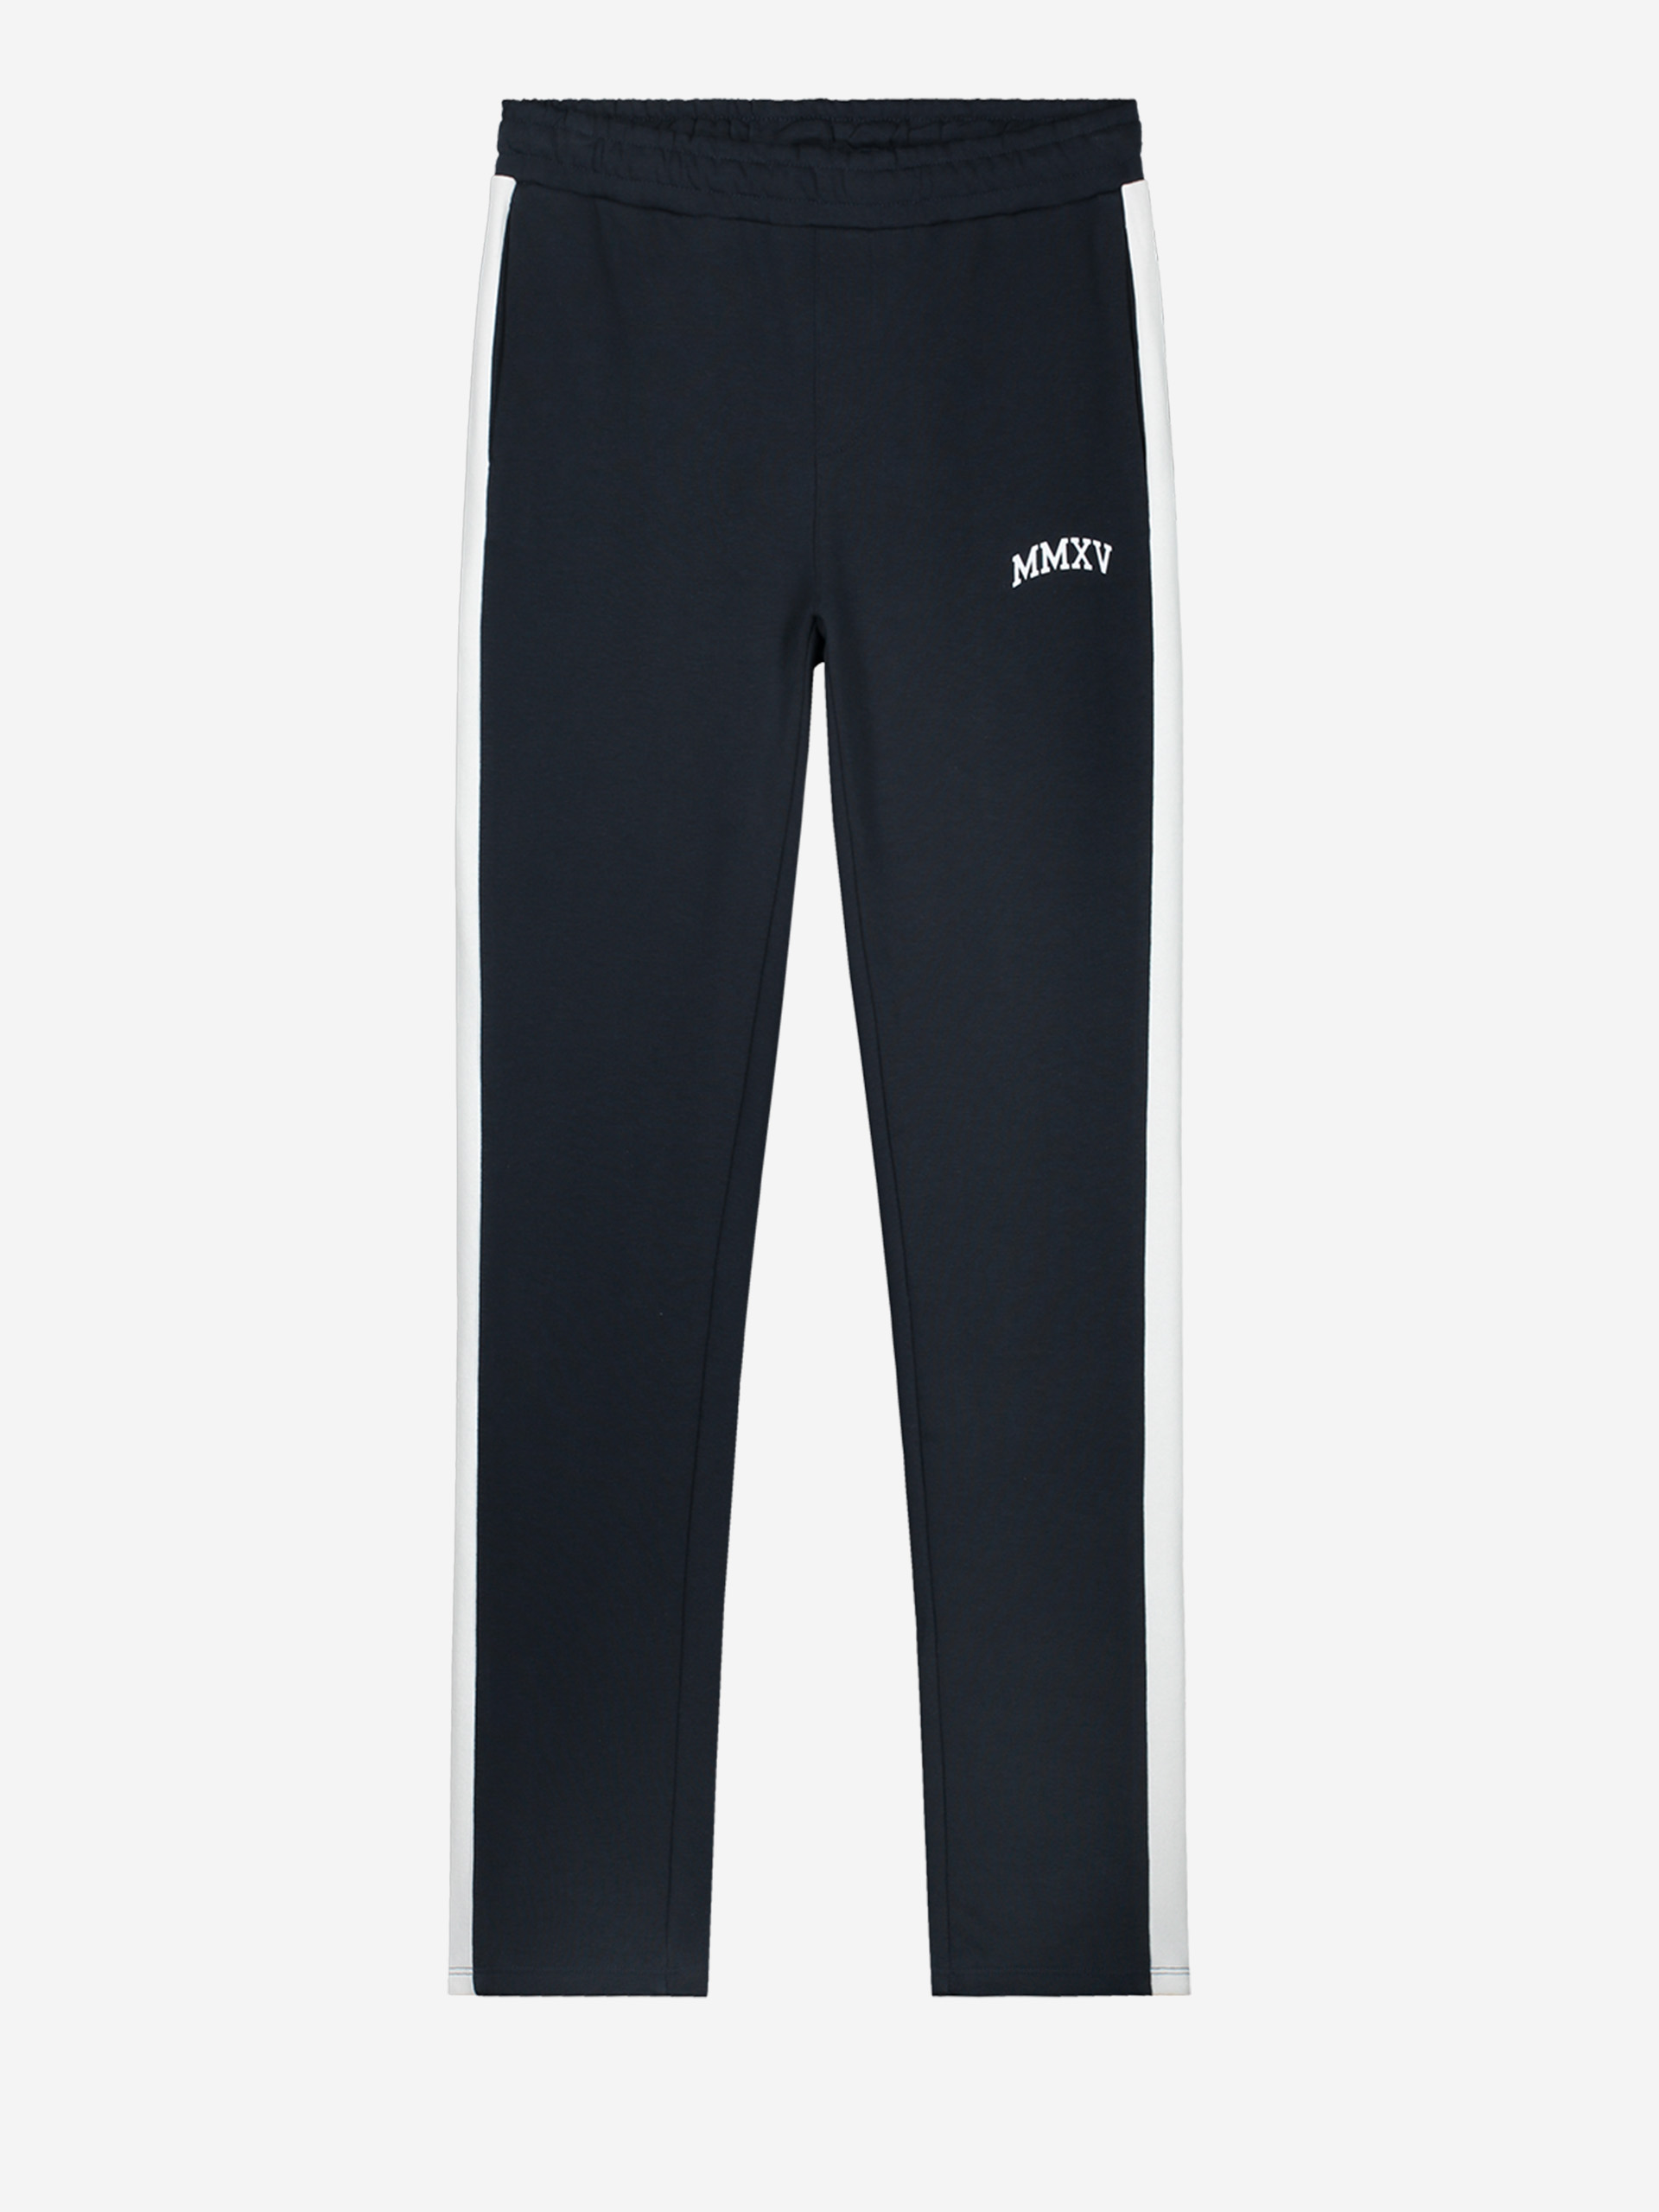 Mid rise Sweatpants with trim